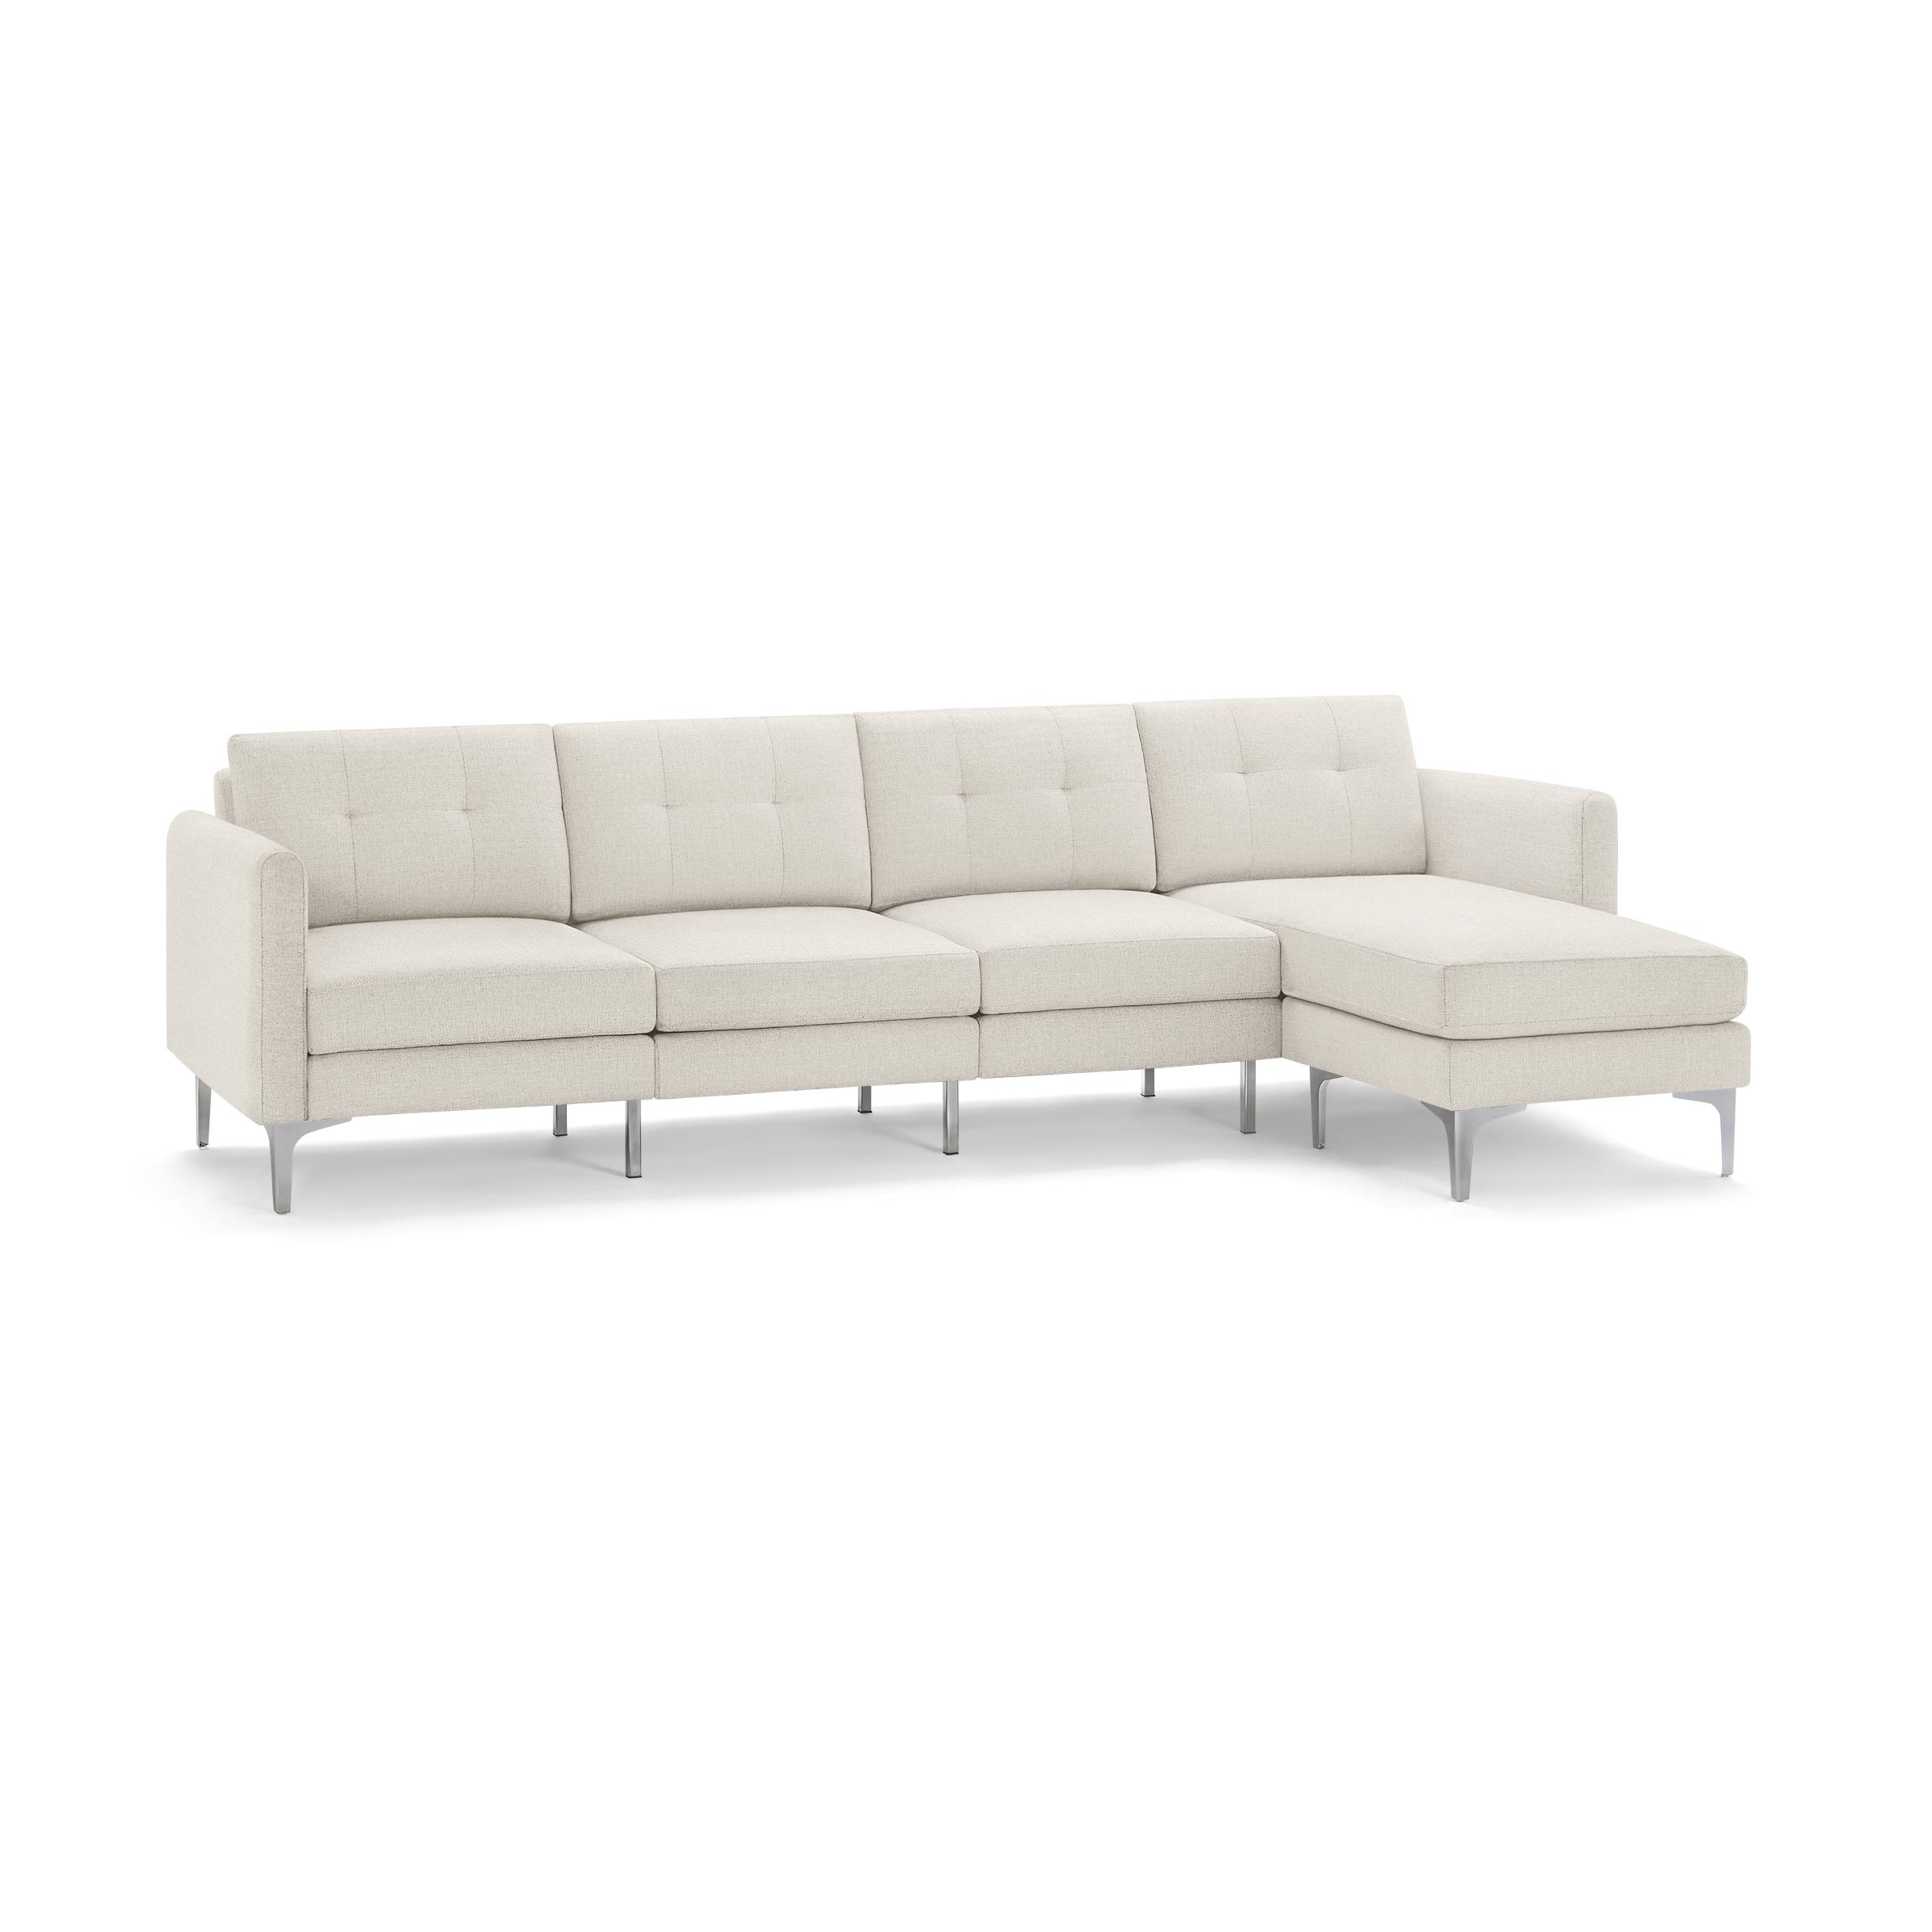 Nomad King Sectional in Ivory, Chrome Legs - Image 0